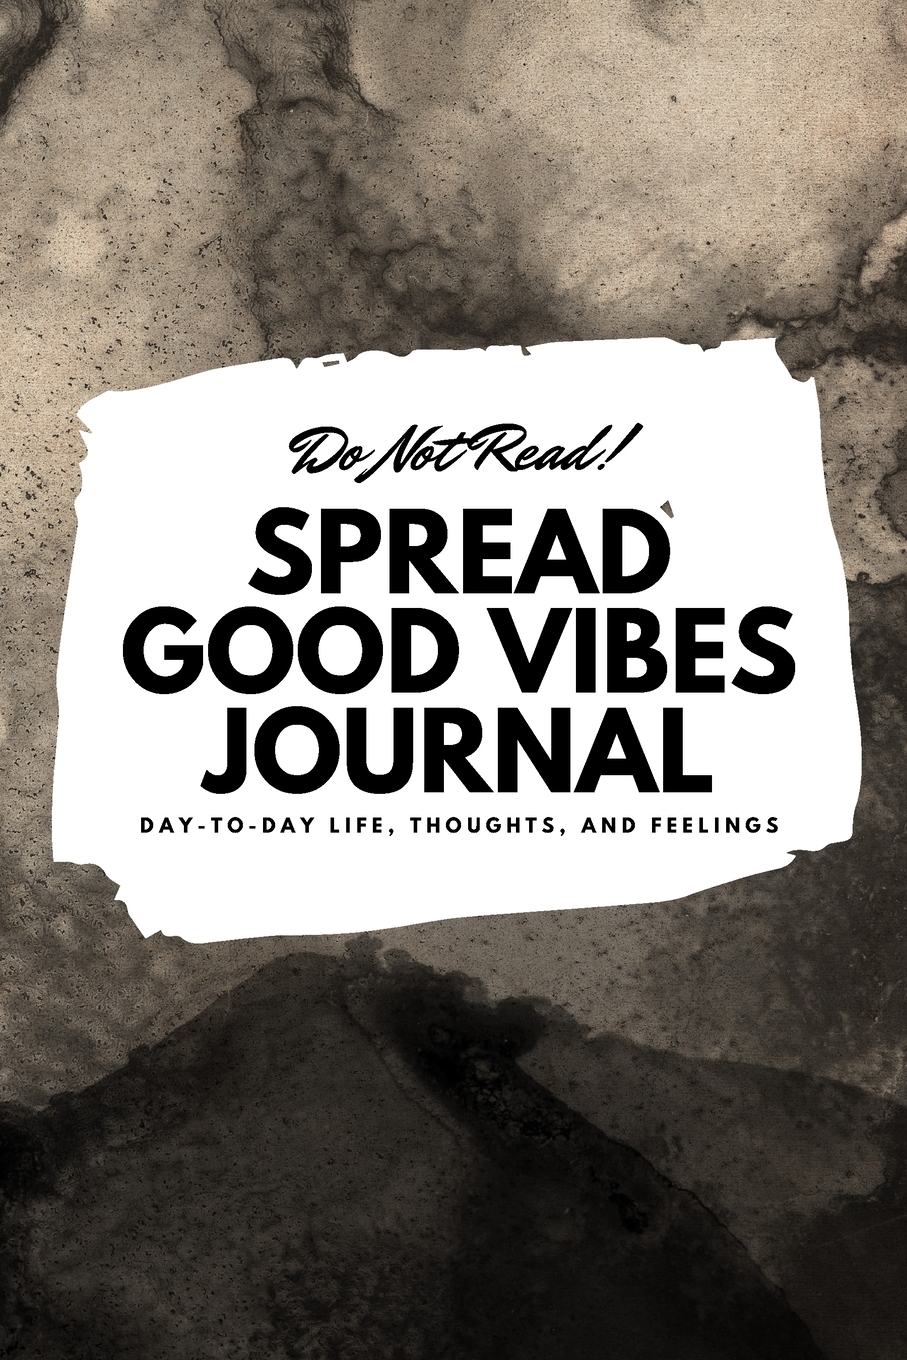 6x9 Blank Journal: Do Not Read! Spread Good Vibes Journal - Small Blank Journal - 6x9 Blank Journal (Softcover Journal / Notebook / Sketchbook / Diary) (Series #21) (Paperback) - image 1 of 1